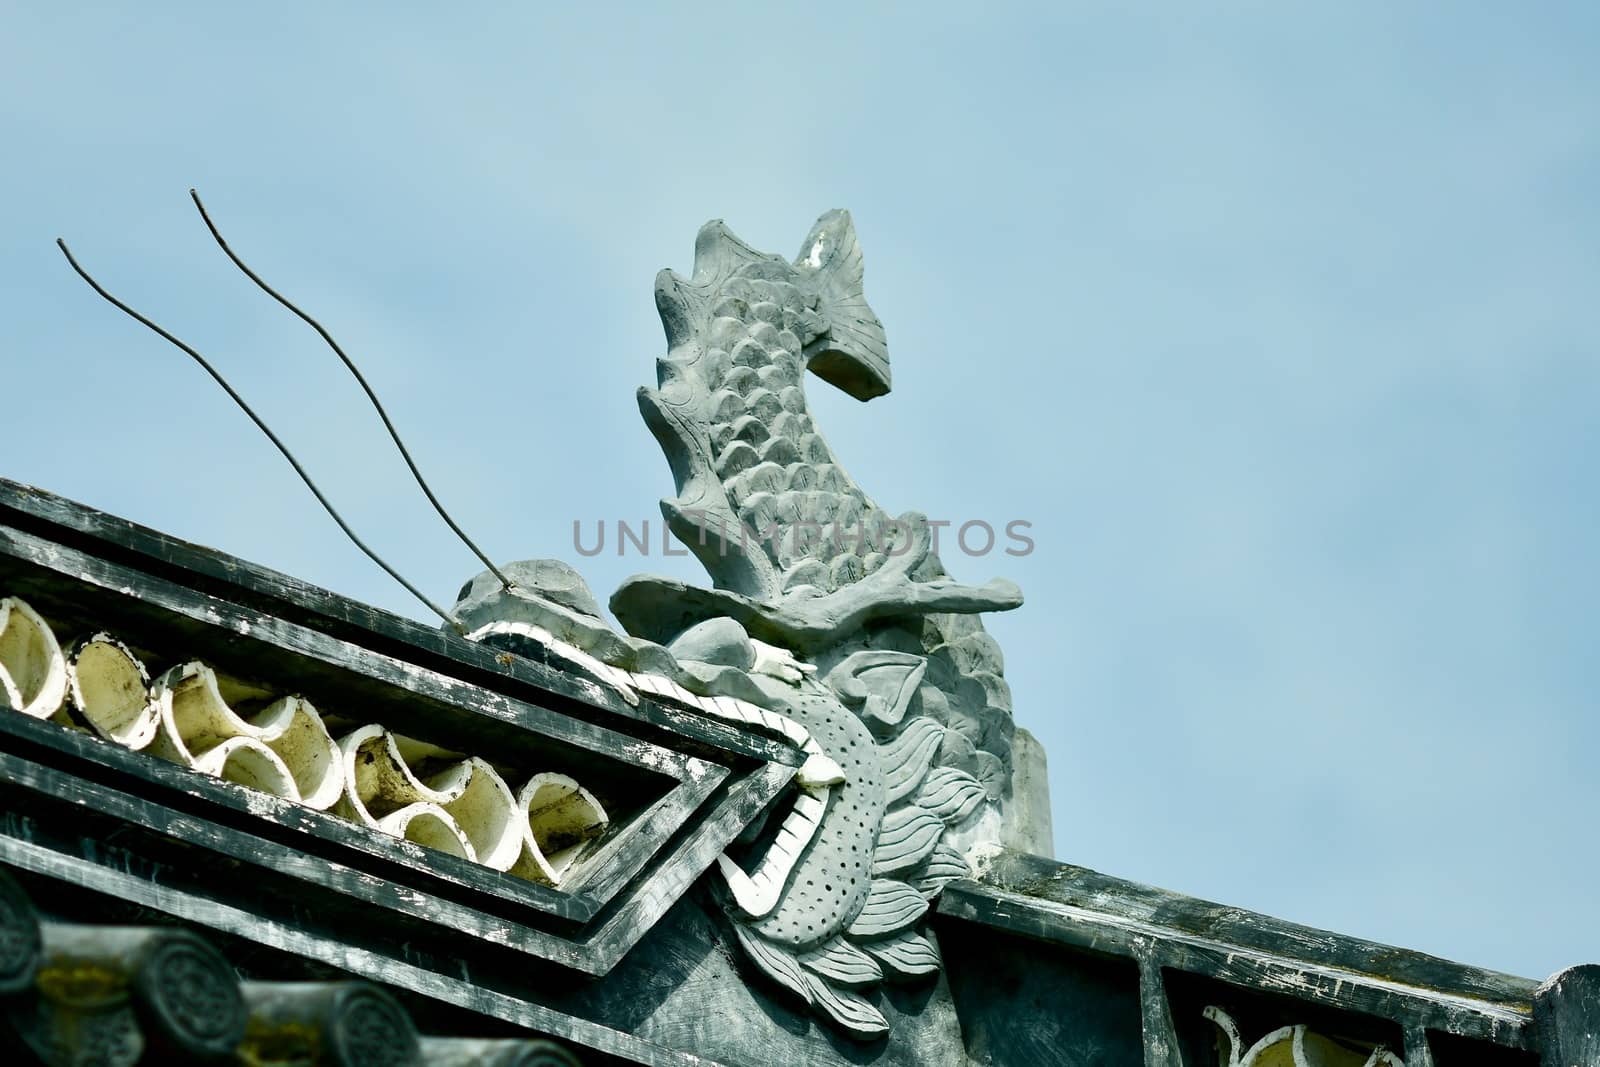 Traditional Chinese architecture - Chinese garden and garden sculpture